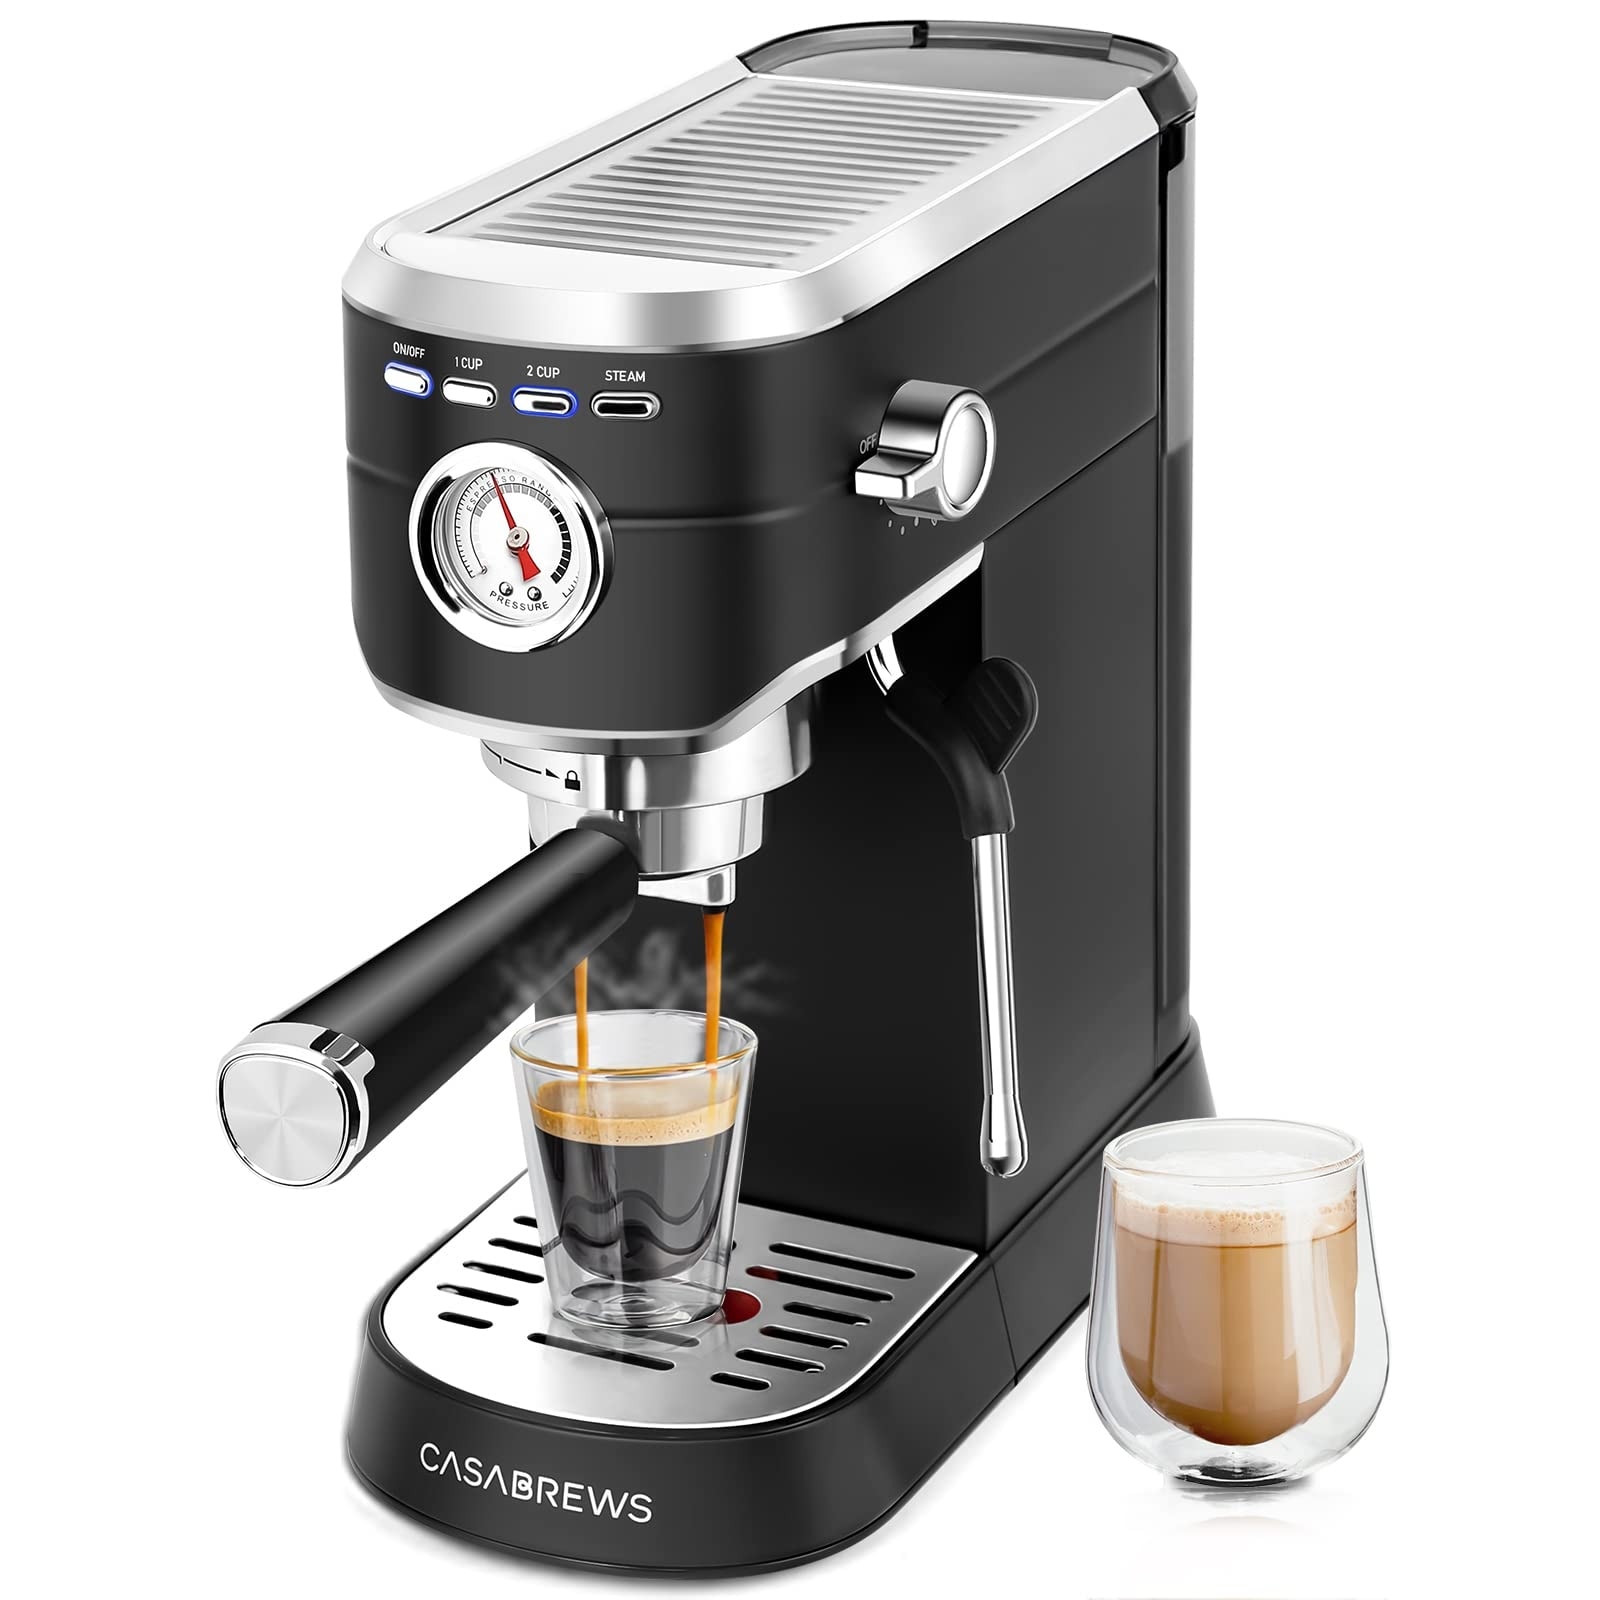 https://ak1.ostkcdn.com/images/products/is/images/direct/945b7c4b1dbd0f77cfb024f23dde4c4122aa2ff9/Espresso-Machine-20-Bar%2C-Stainless-Steel-Maker-with-Milk-Frother-Steam-Wand-for-Home%2C-Coffee-Machine-with-Removable-Water-Tank.jpg